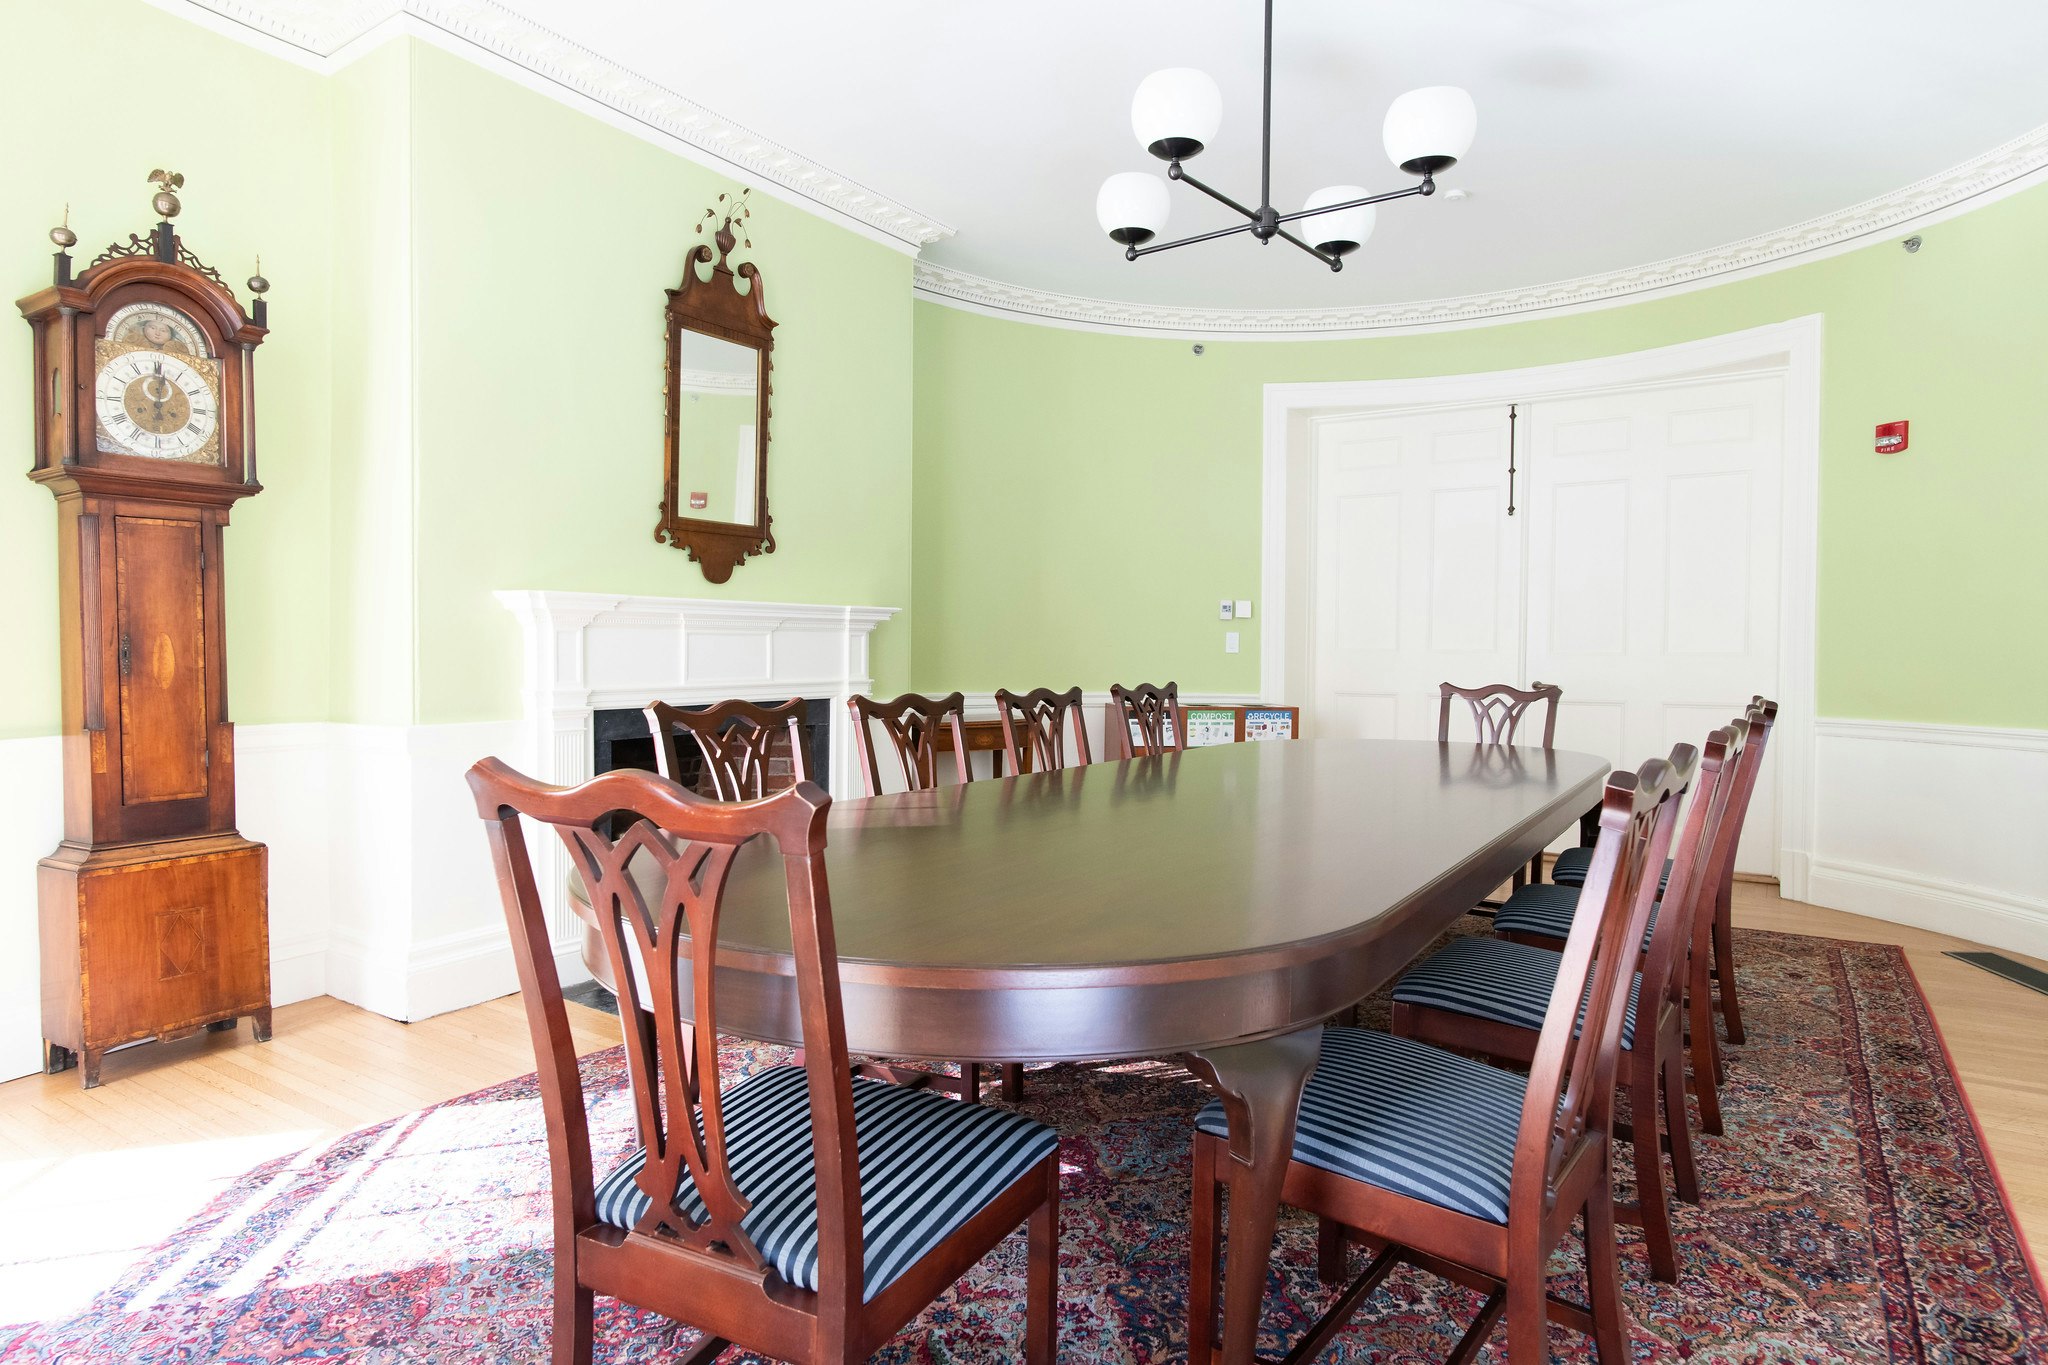 Another angle of the Gardiner Room, Conference table with 10 seats lined around table. Grandfather clock in the left corner of room. White, double door entrance on the other end of the conference table.